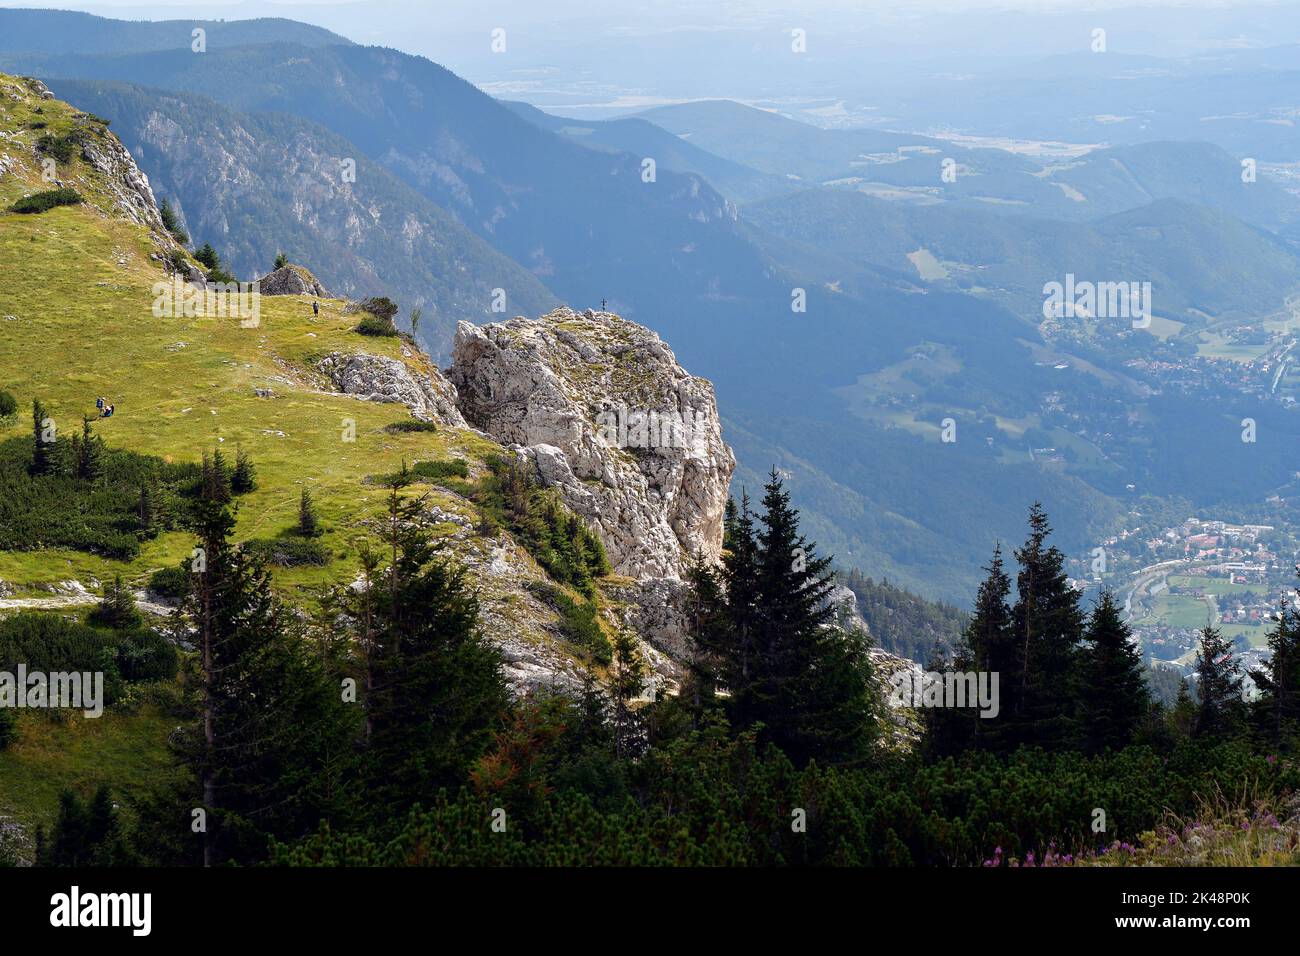 Austria, Rax mountain in Lower Austria with view over the so-called Vienna Basin Stock Photo